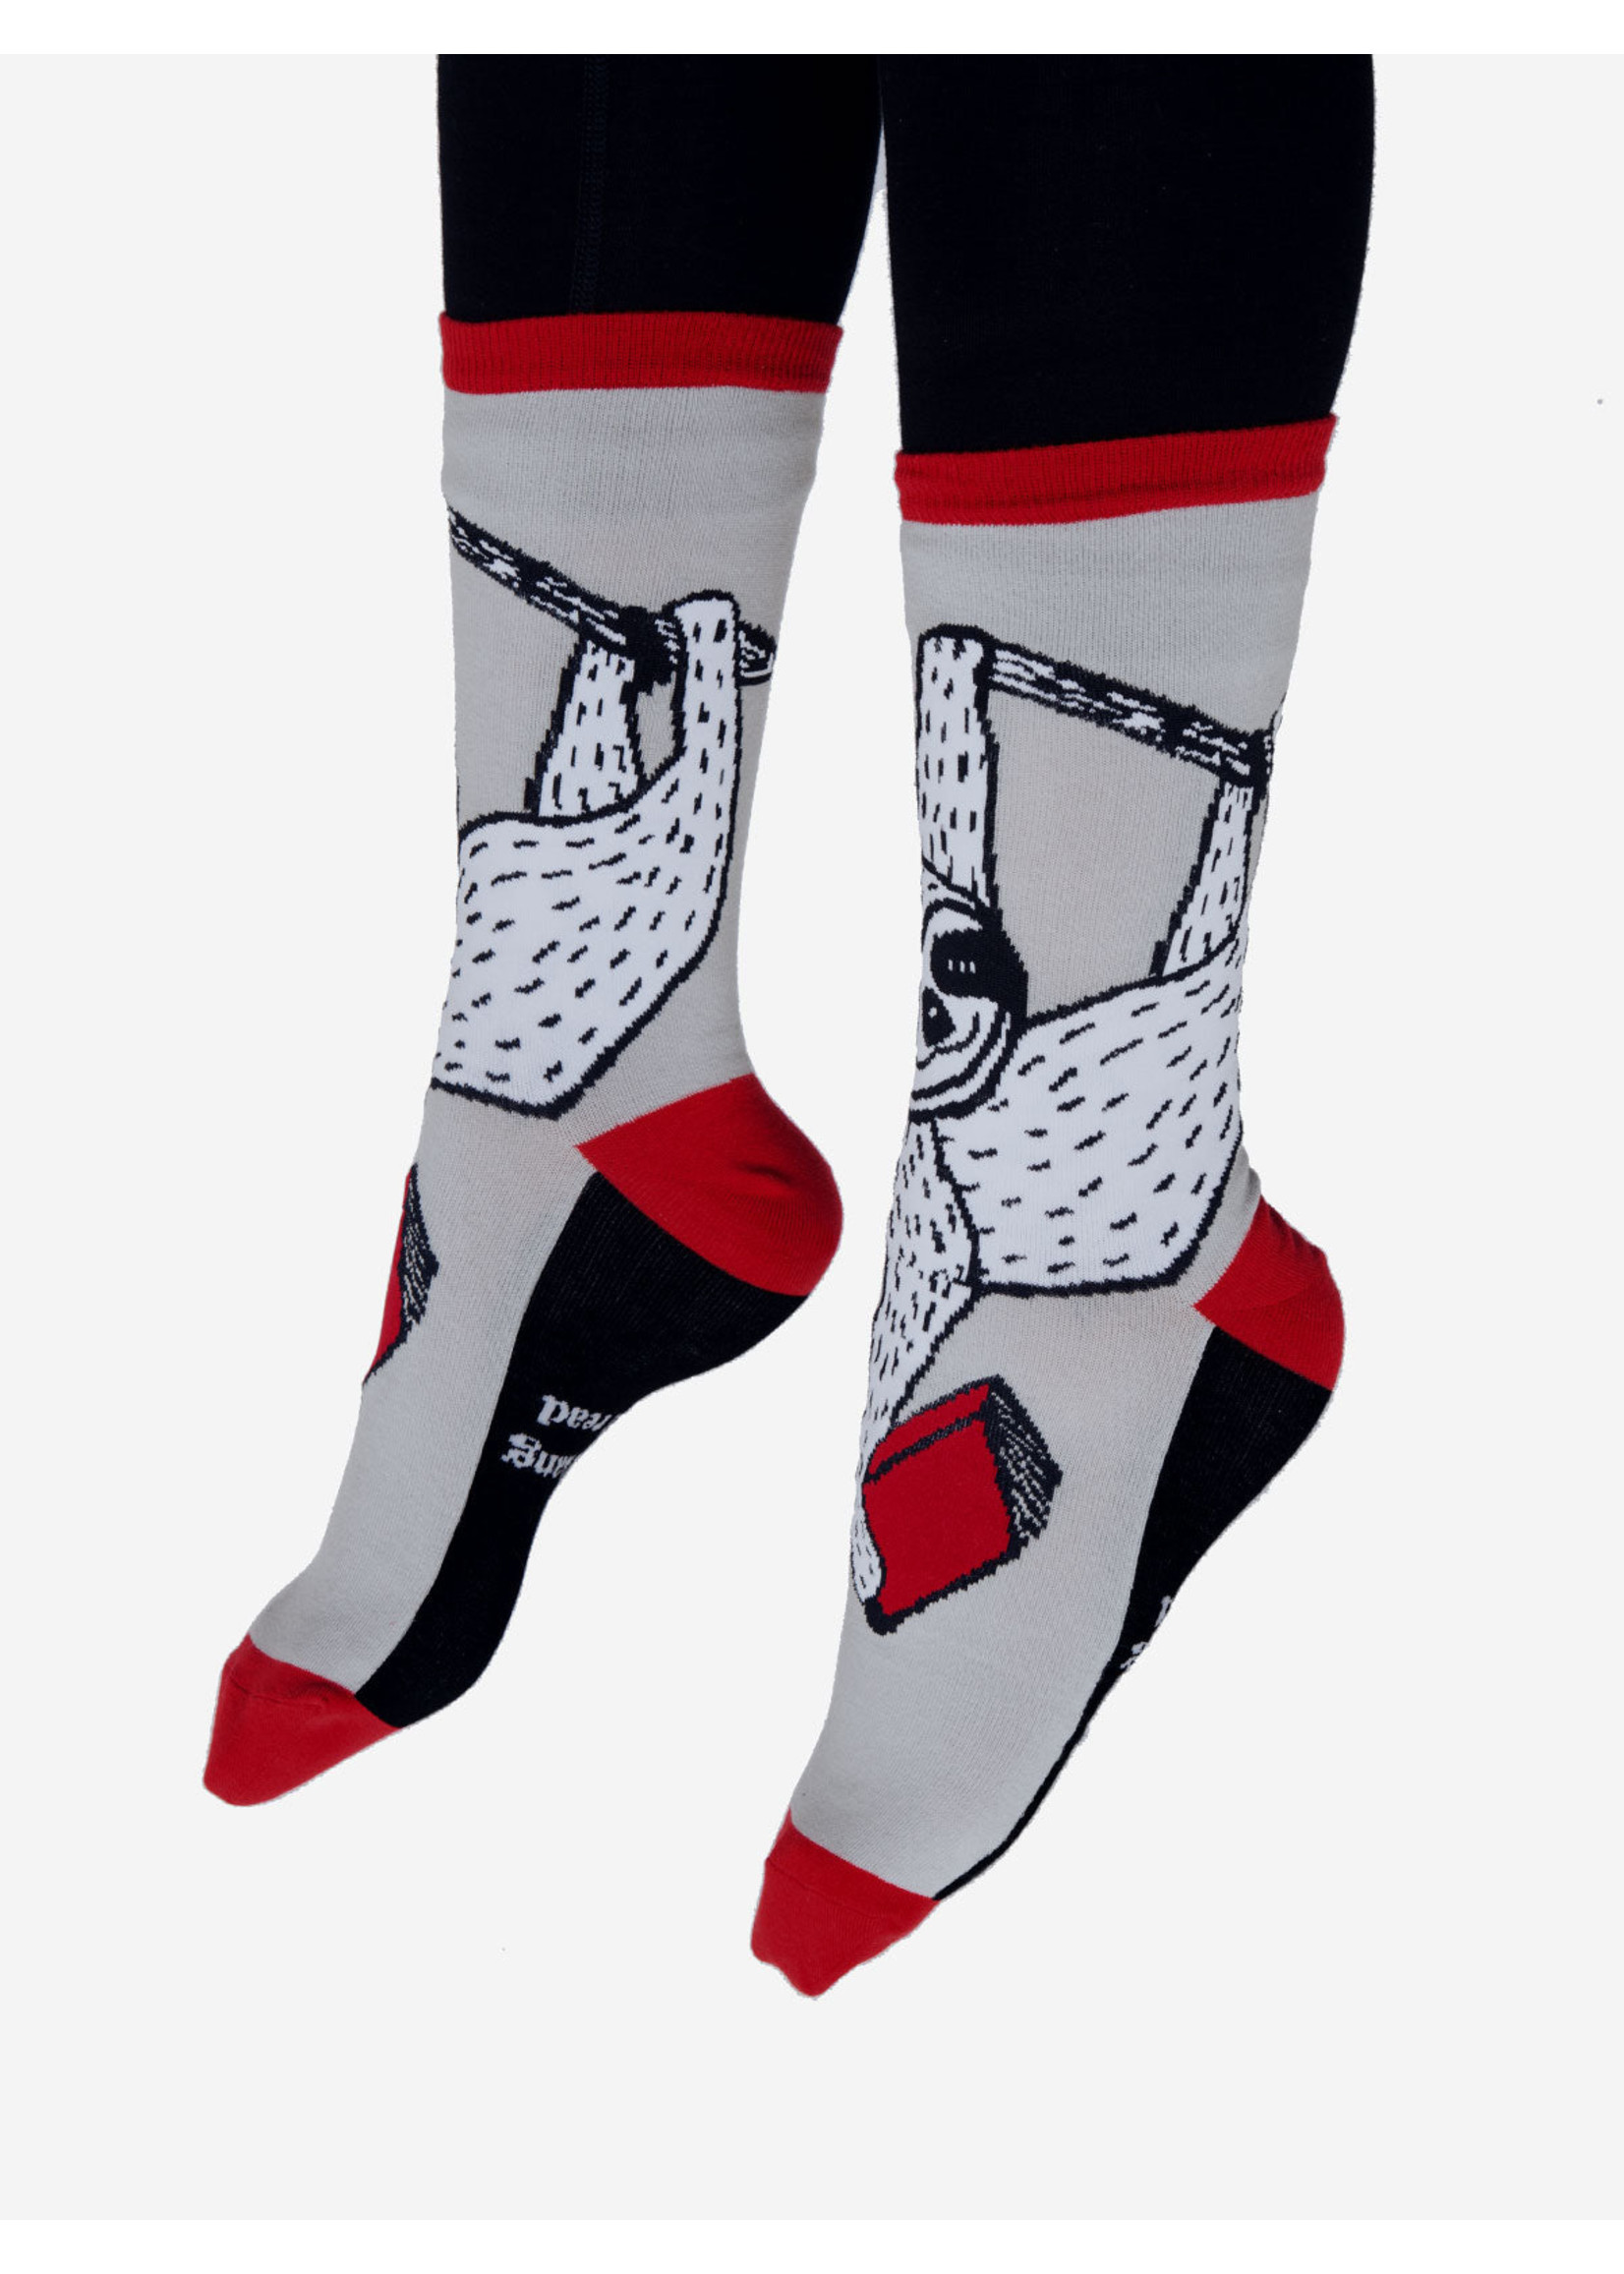 Out of Print Book Sloth Socks - Adult